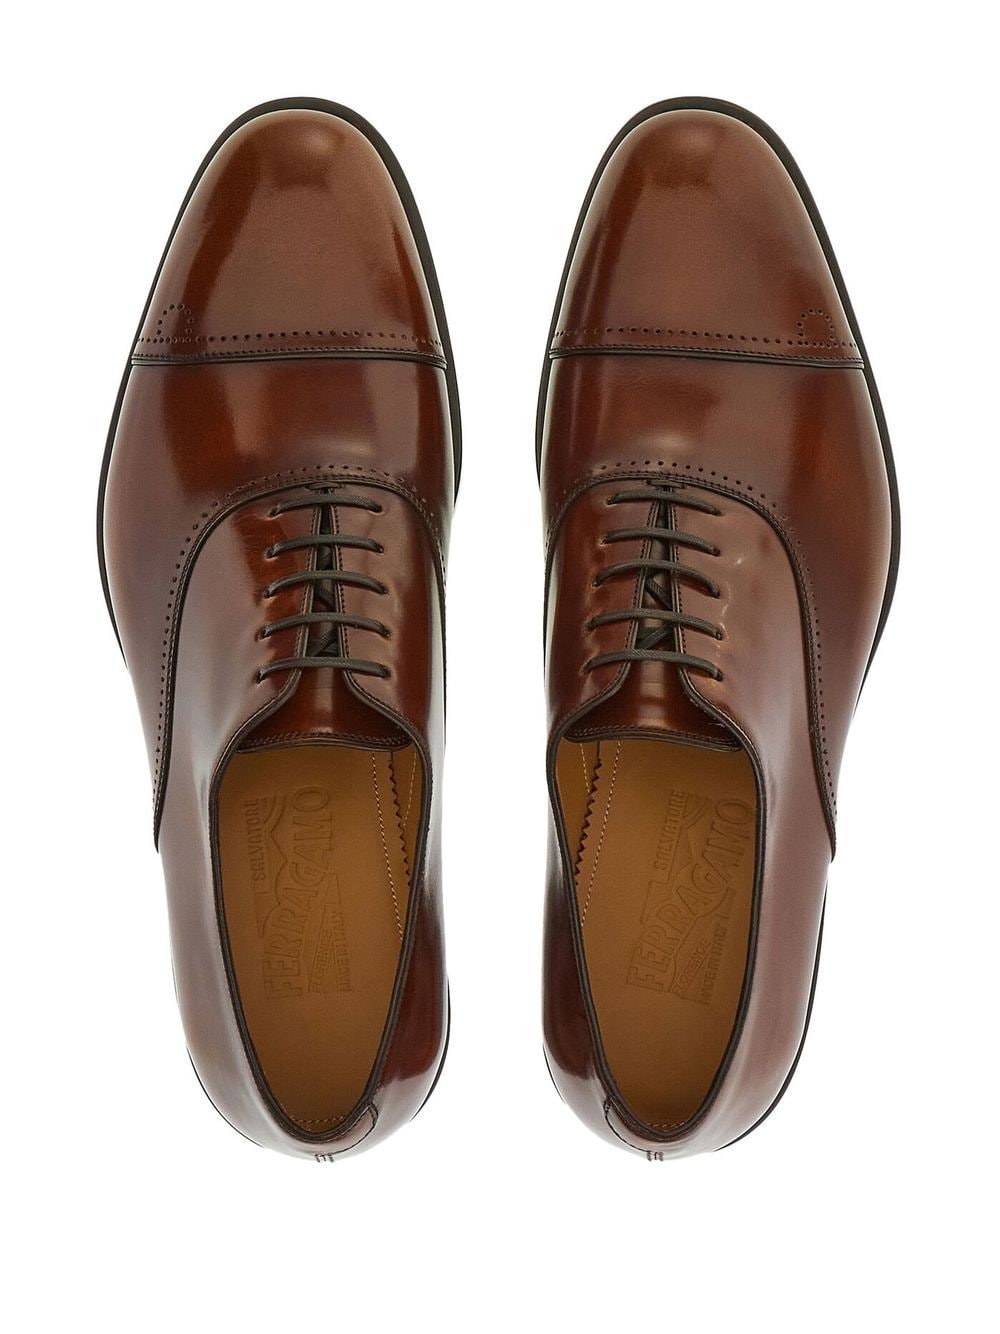 Giovanni Leather Oxford Shoes